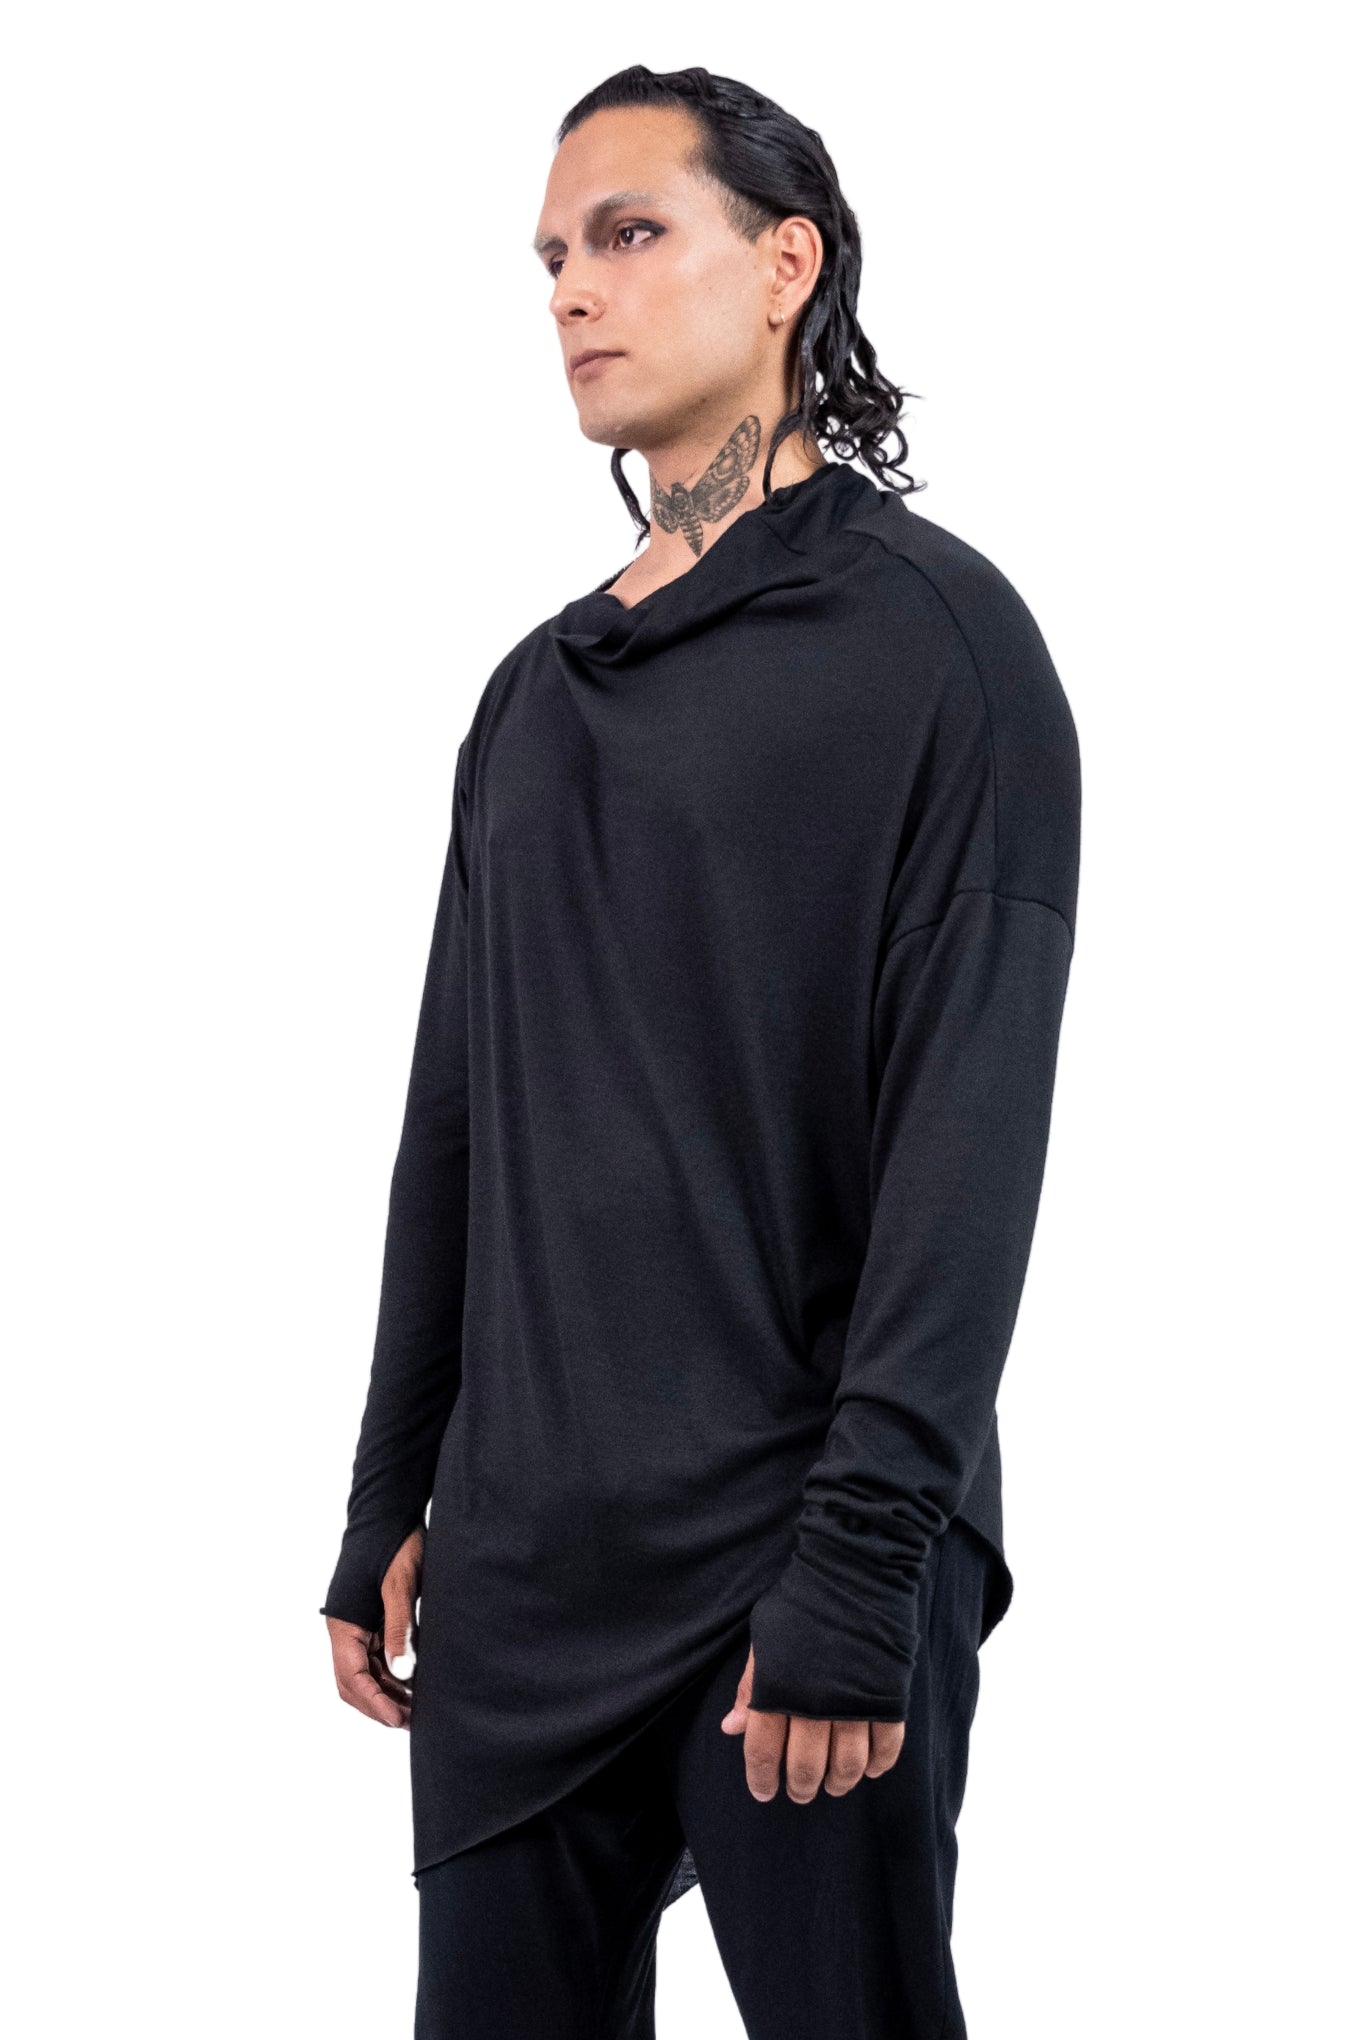 Skyline Asymmetric Knit Sweater in Black with Thumb Holes